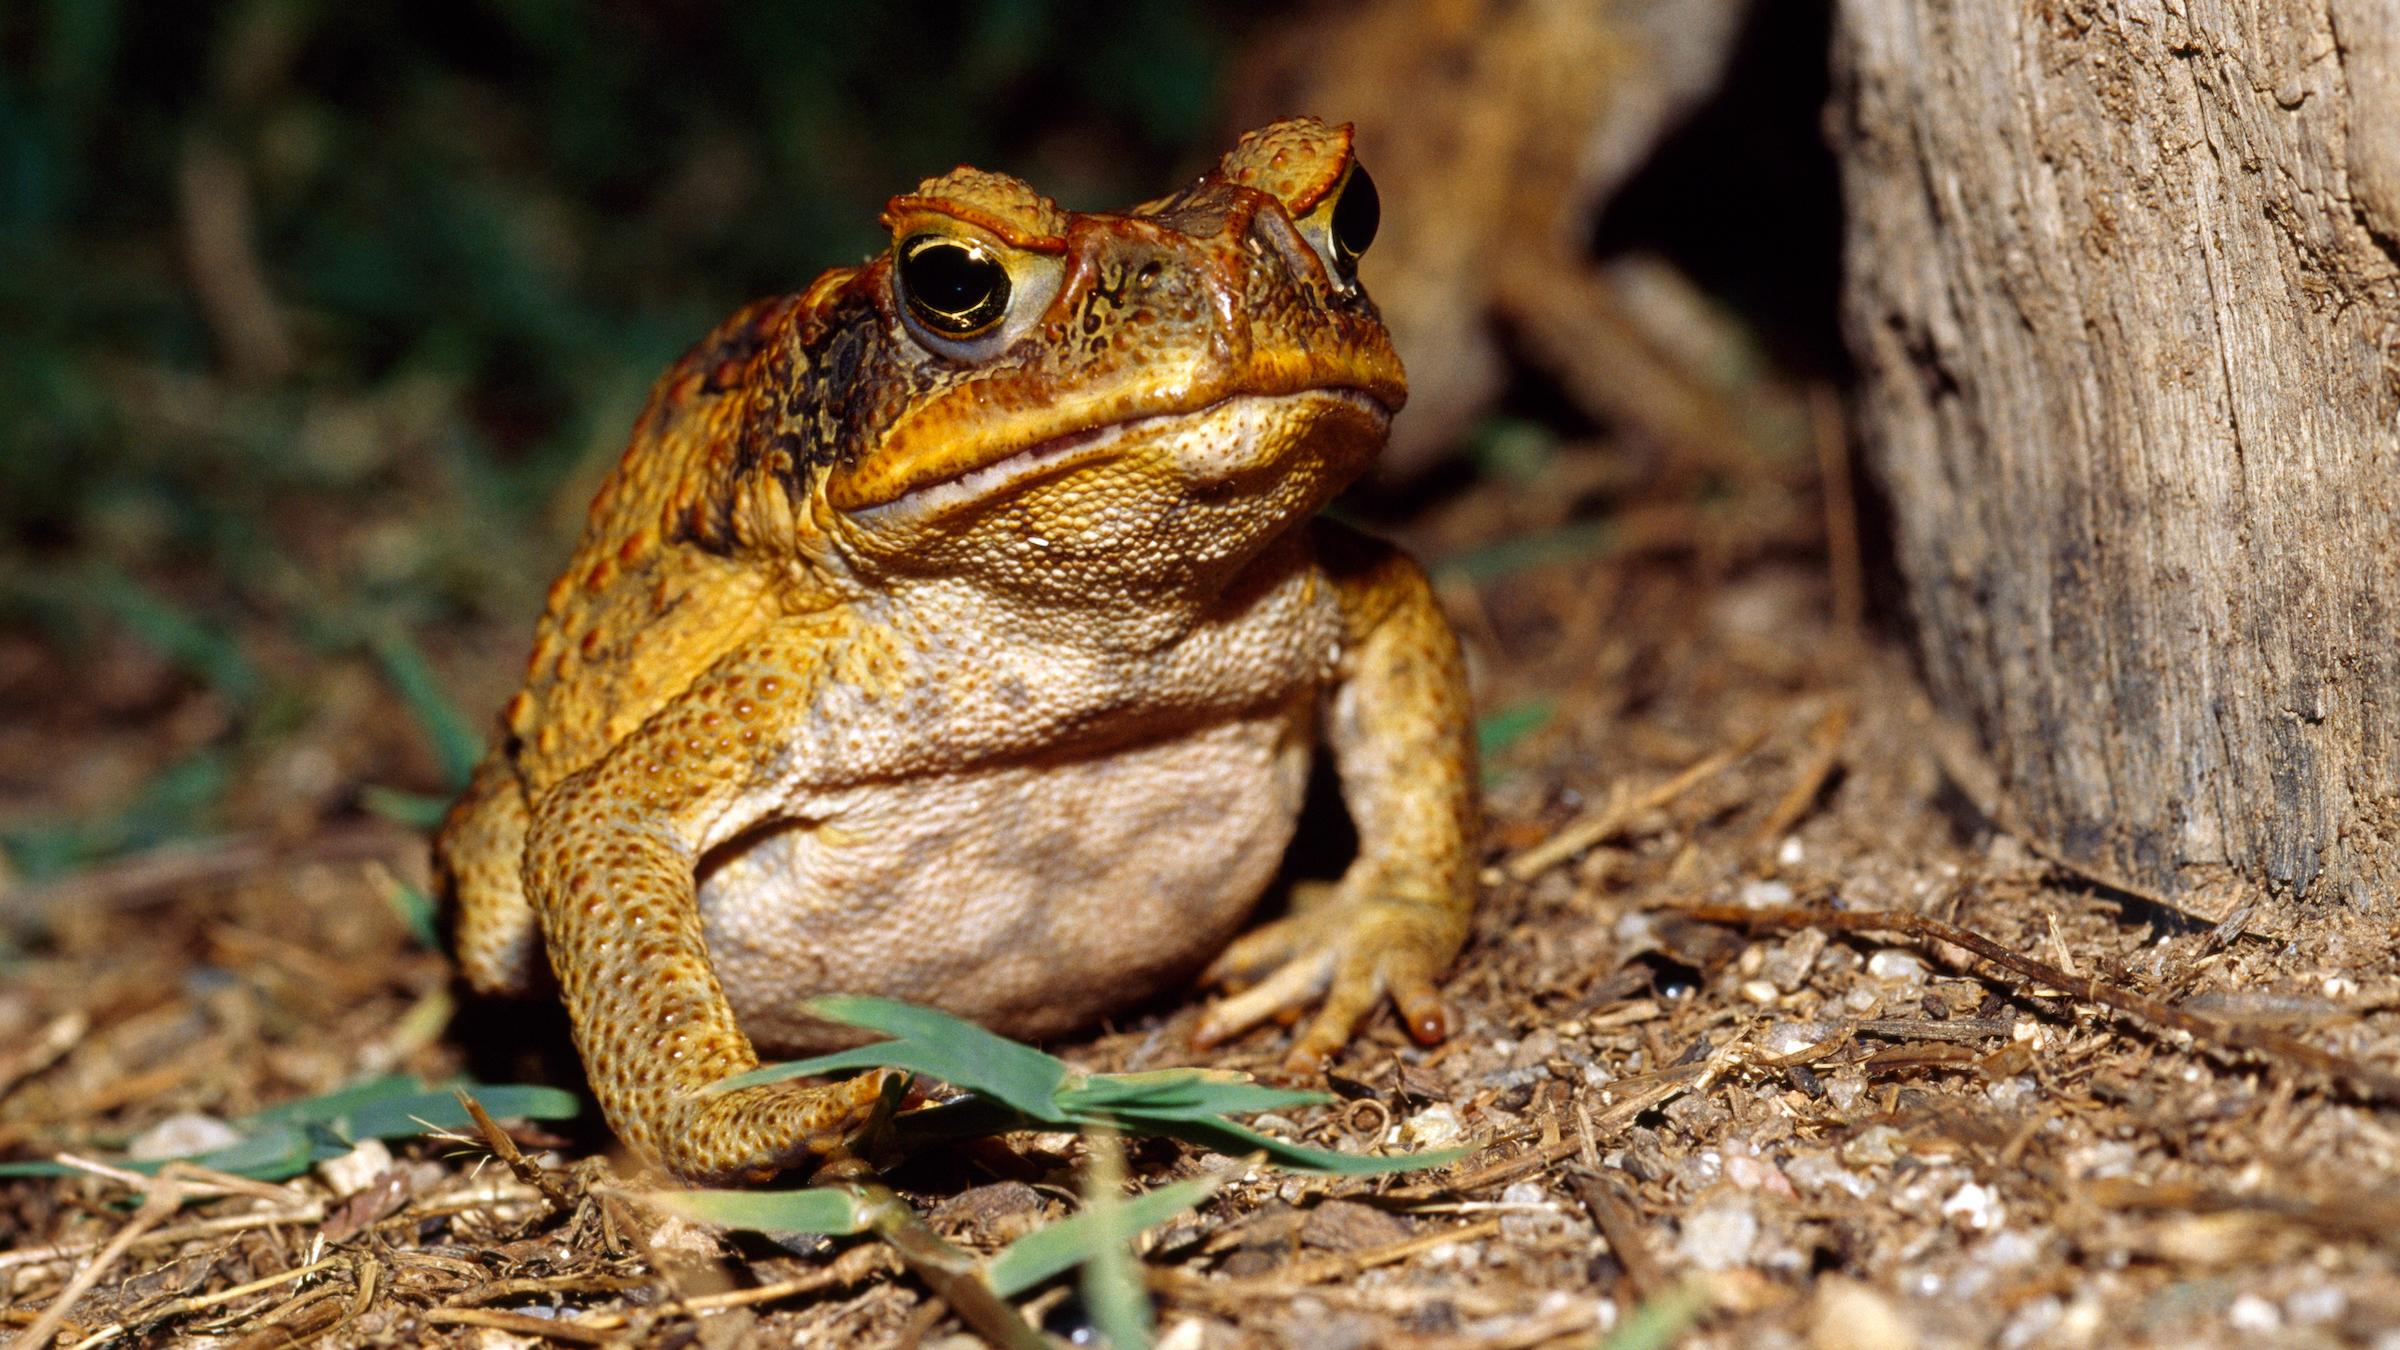 The cane toad (Rhinella marina) is an invasive species in Australia, where its tadpoles have become voracious cannibals.